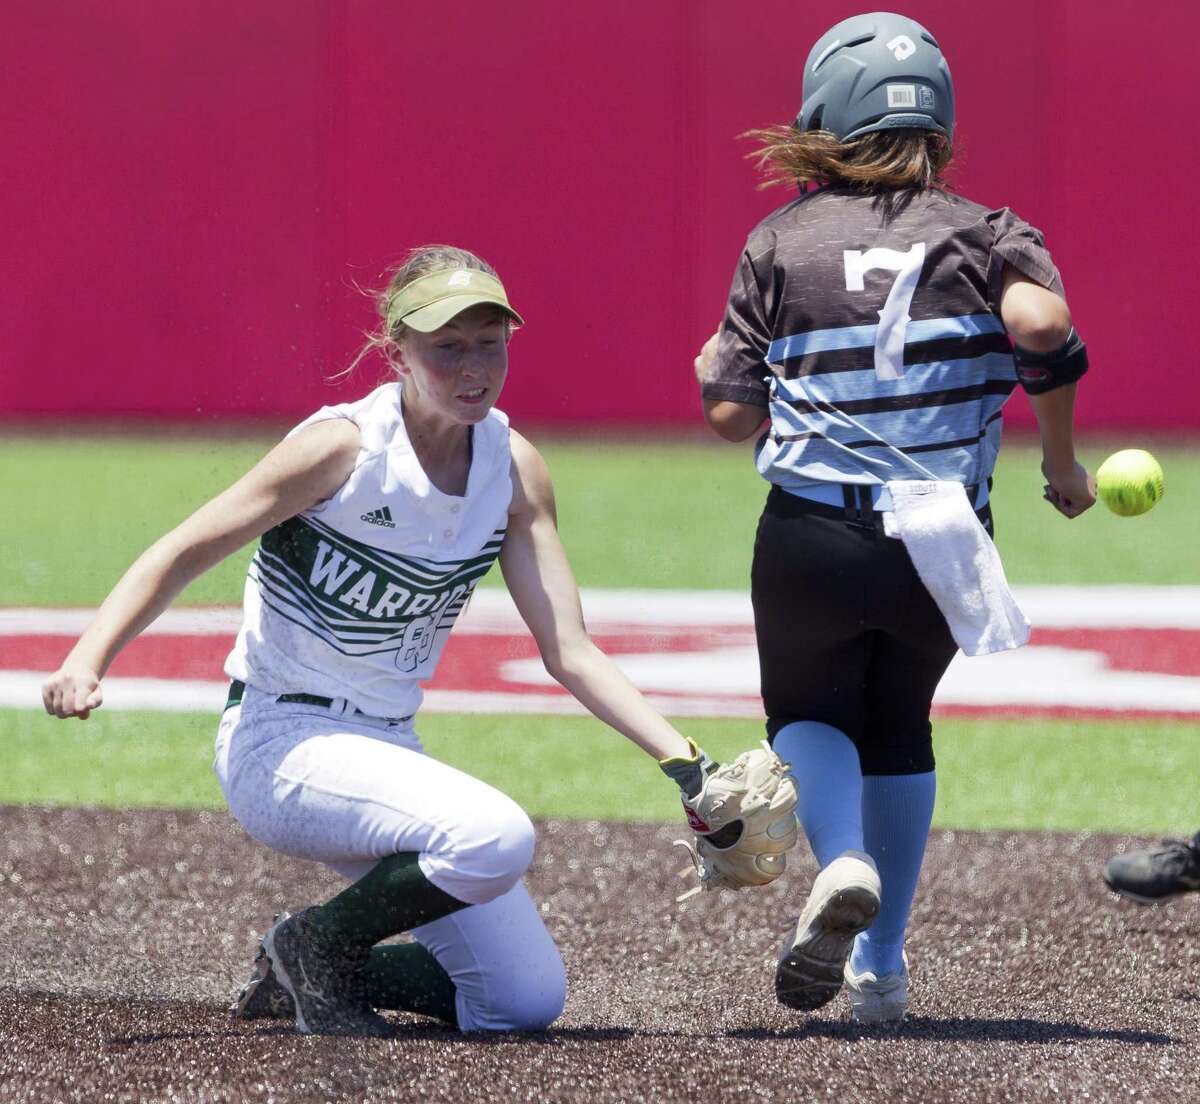 The Woodlands Christian Academy shortstop Ashley Darilek (88) tries to field a throw to second as Madorry Gonzales #7 of Waco Reicher Catholic High School reaches base safely in the second inning during the TAPPS Division III state championship game at The Ballparks in Crosby, Thursday, May 16, 2019, in Crosby.